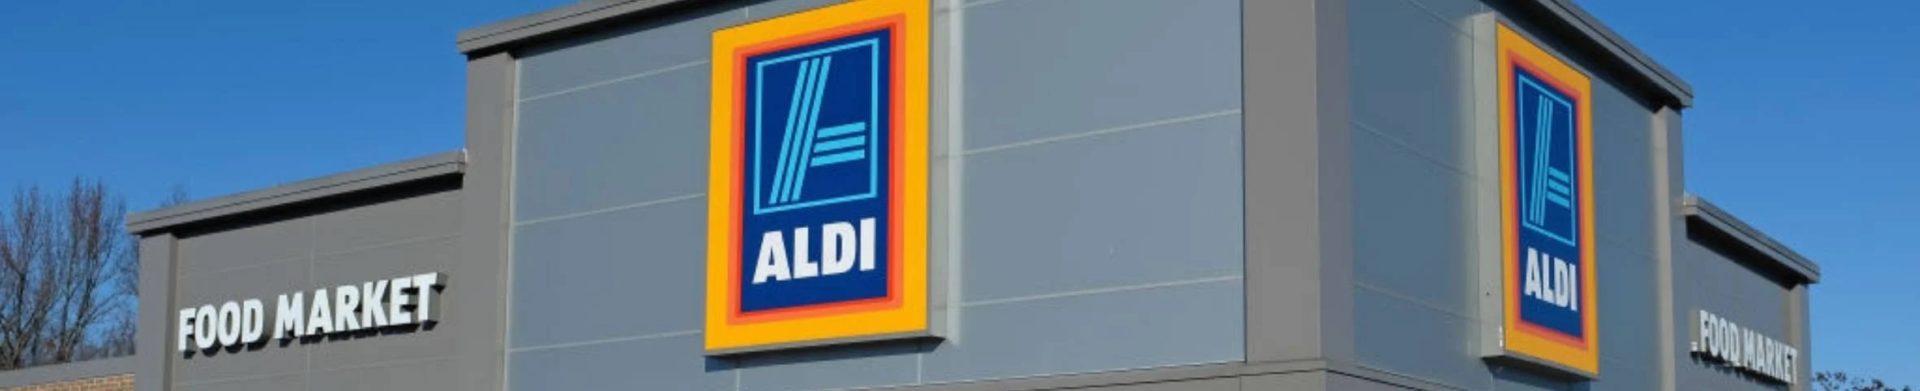 Aldi storefront in the daytime